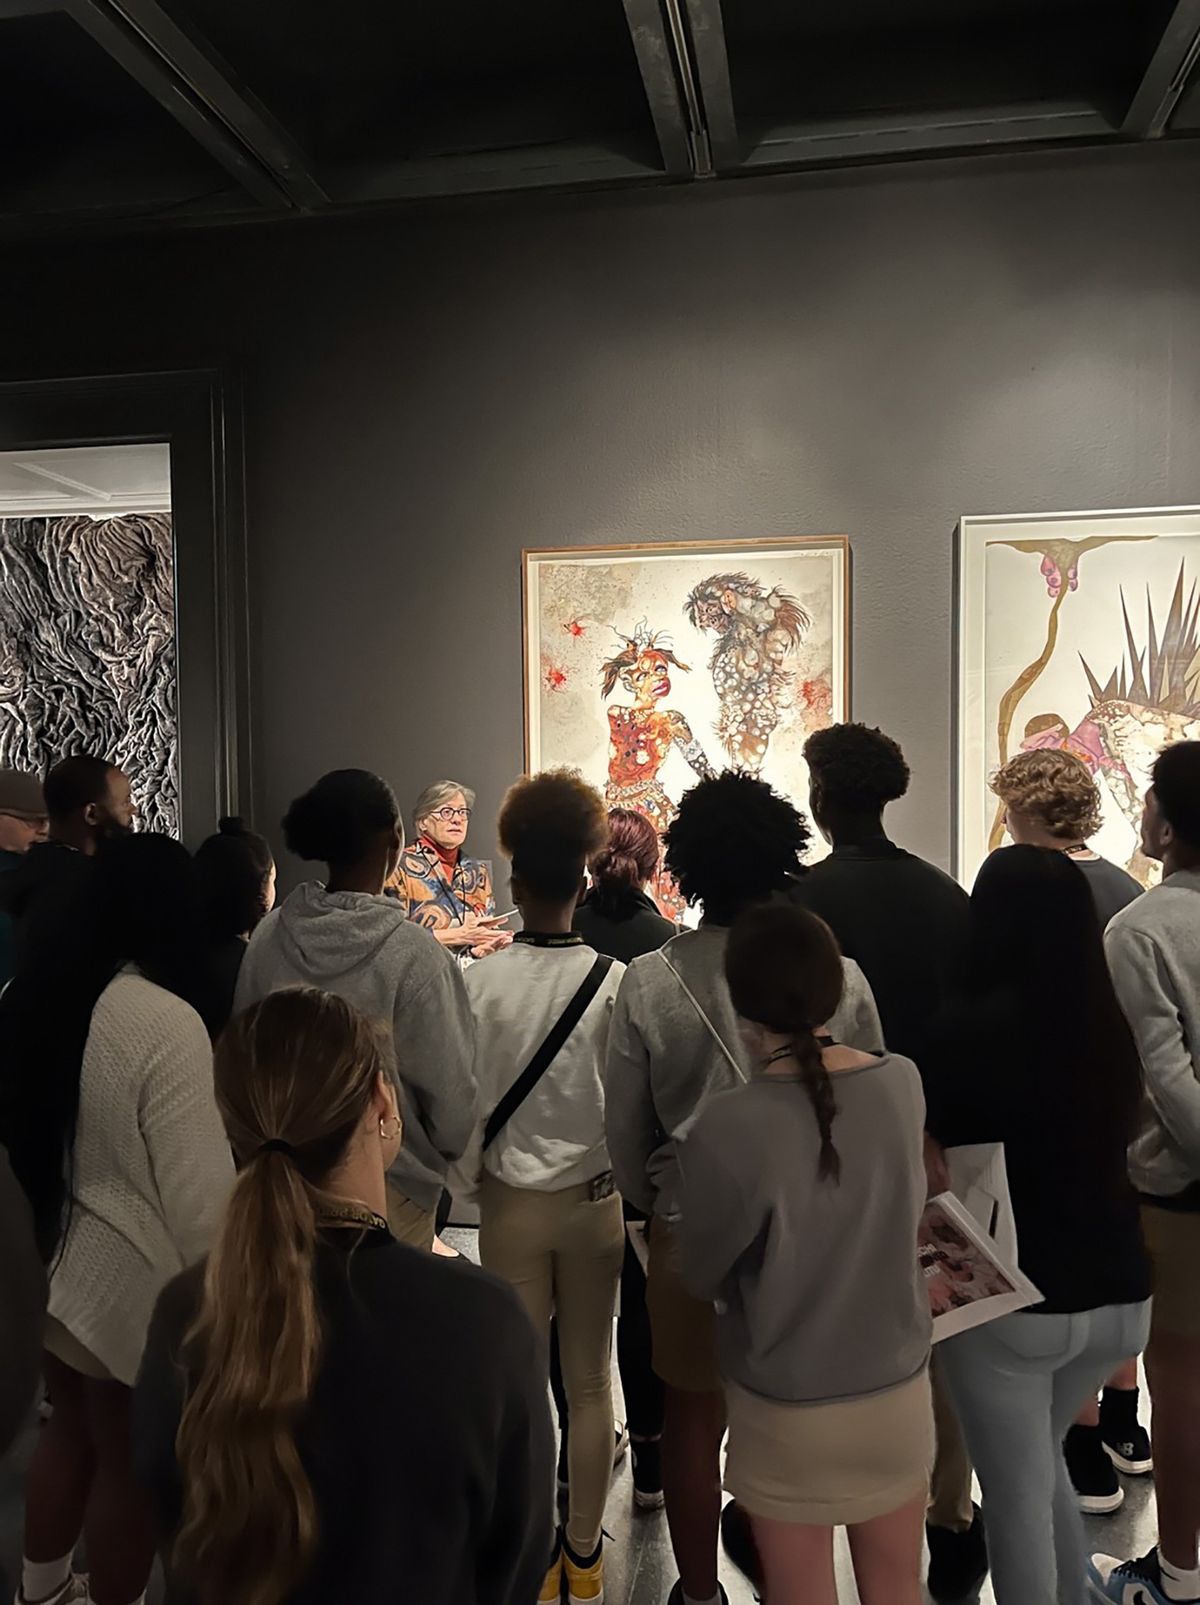 Secondary-school students tour Wangechi Mutu’s works at the New Orleans Museum of Art as part of their African American studies and art history courses Courtesy of the New Orleans Museum of Art